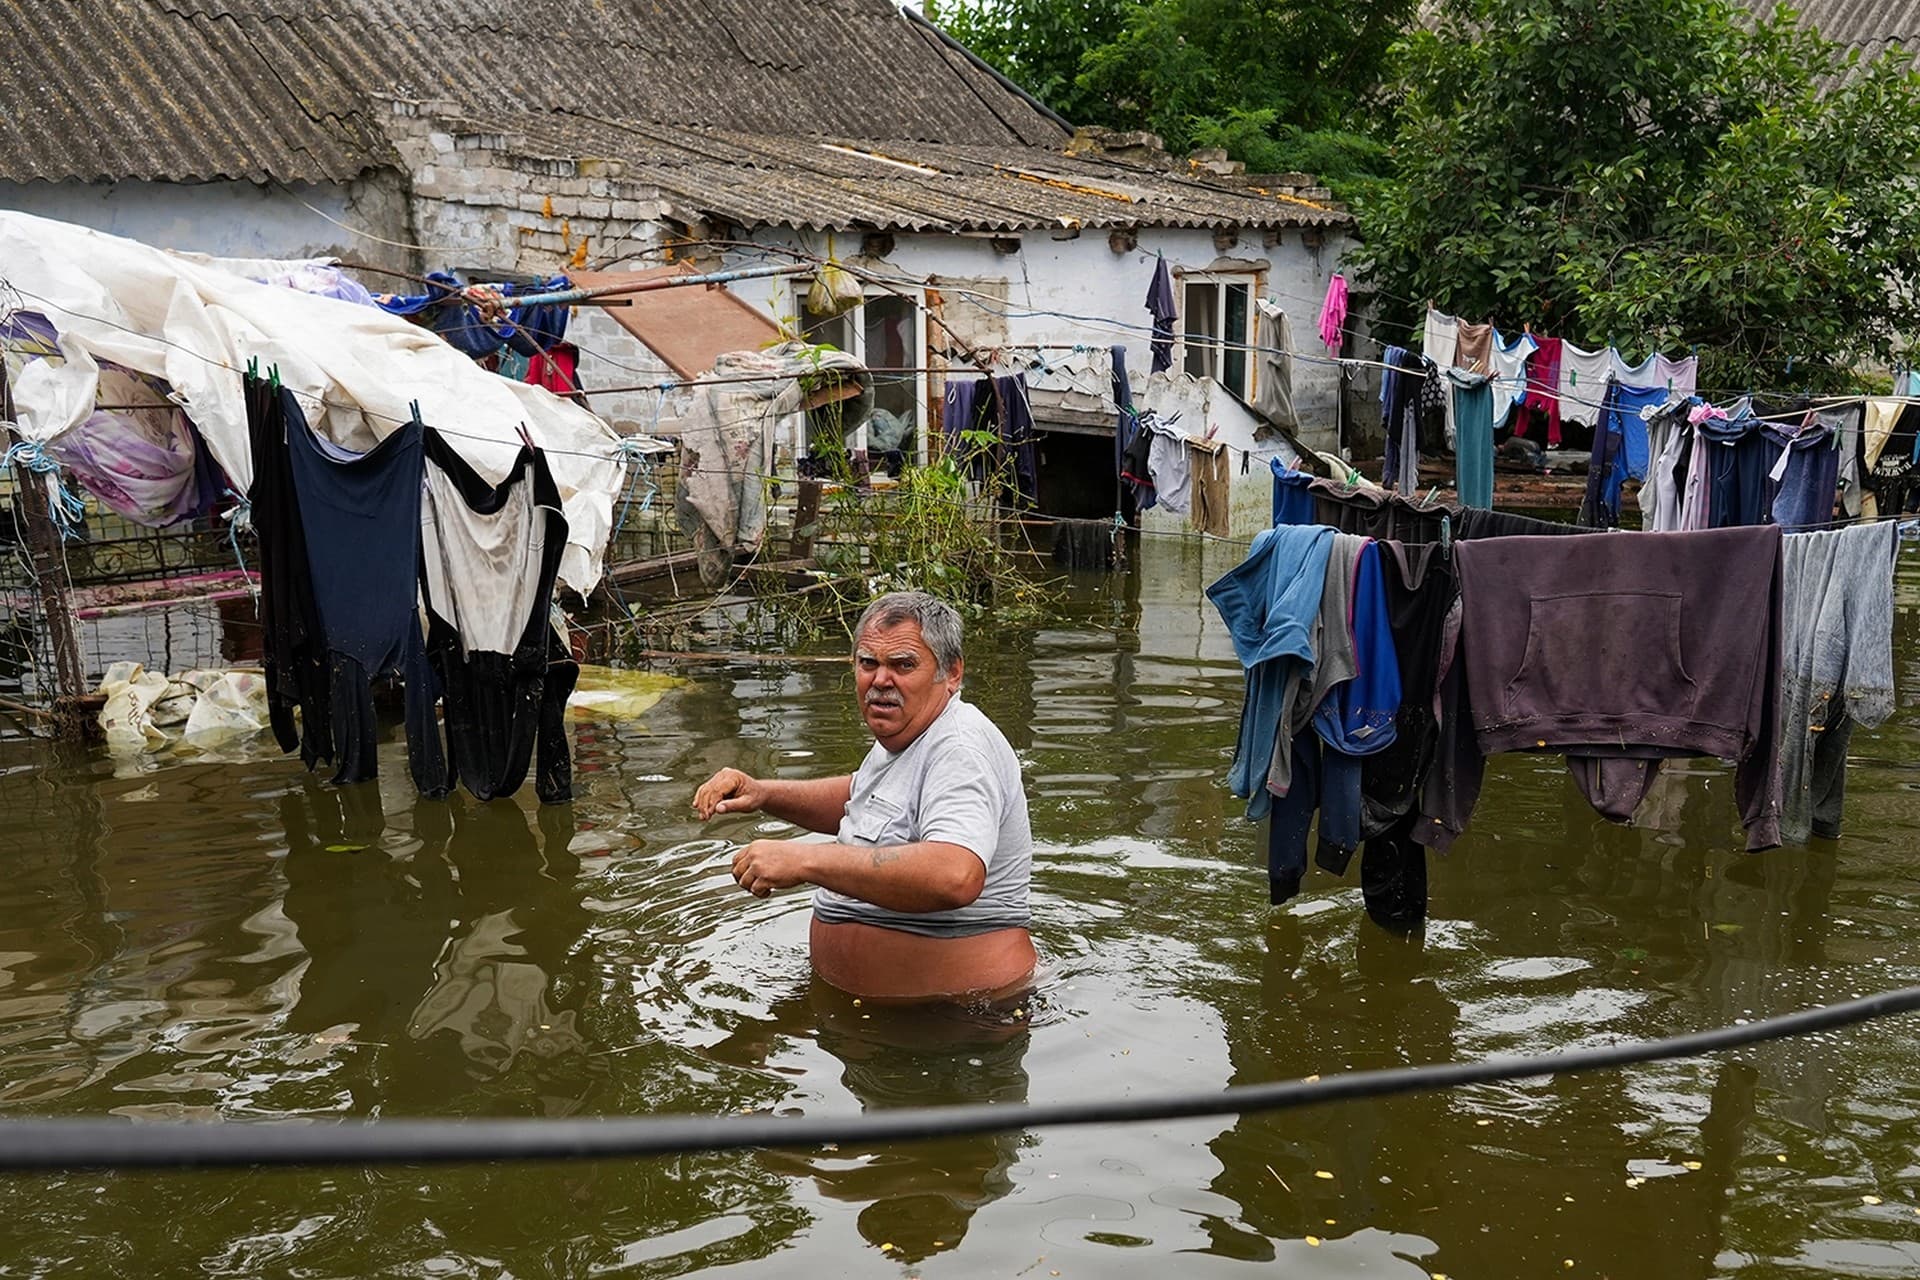 Local resident Yuriy walks in the flooded yard of his house in Afanasiyivka